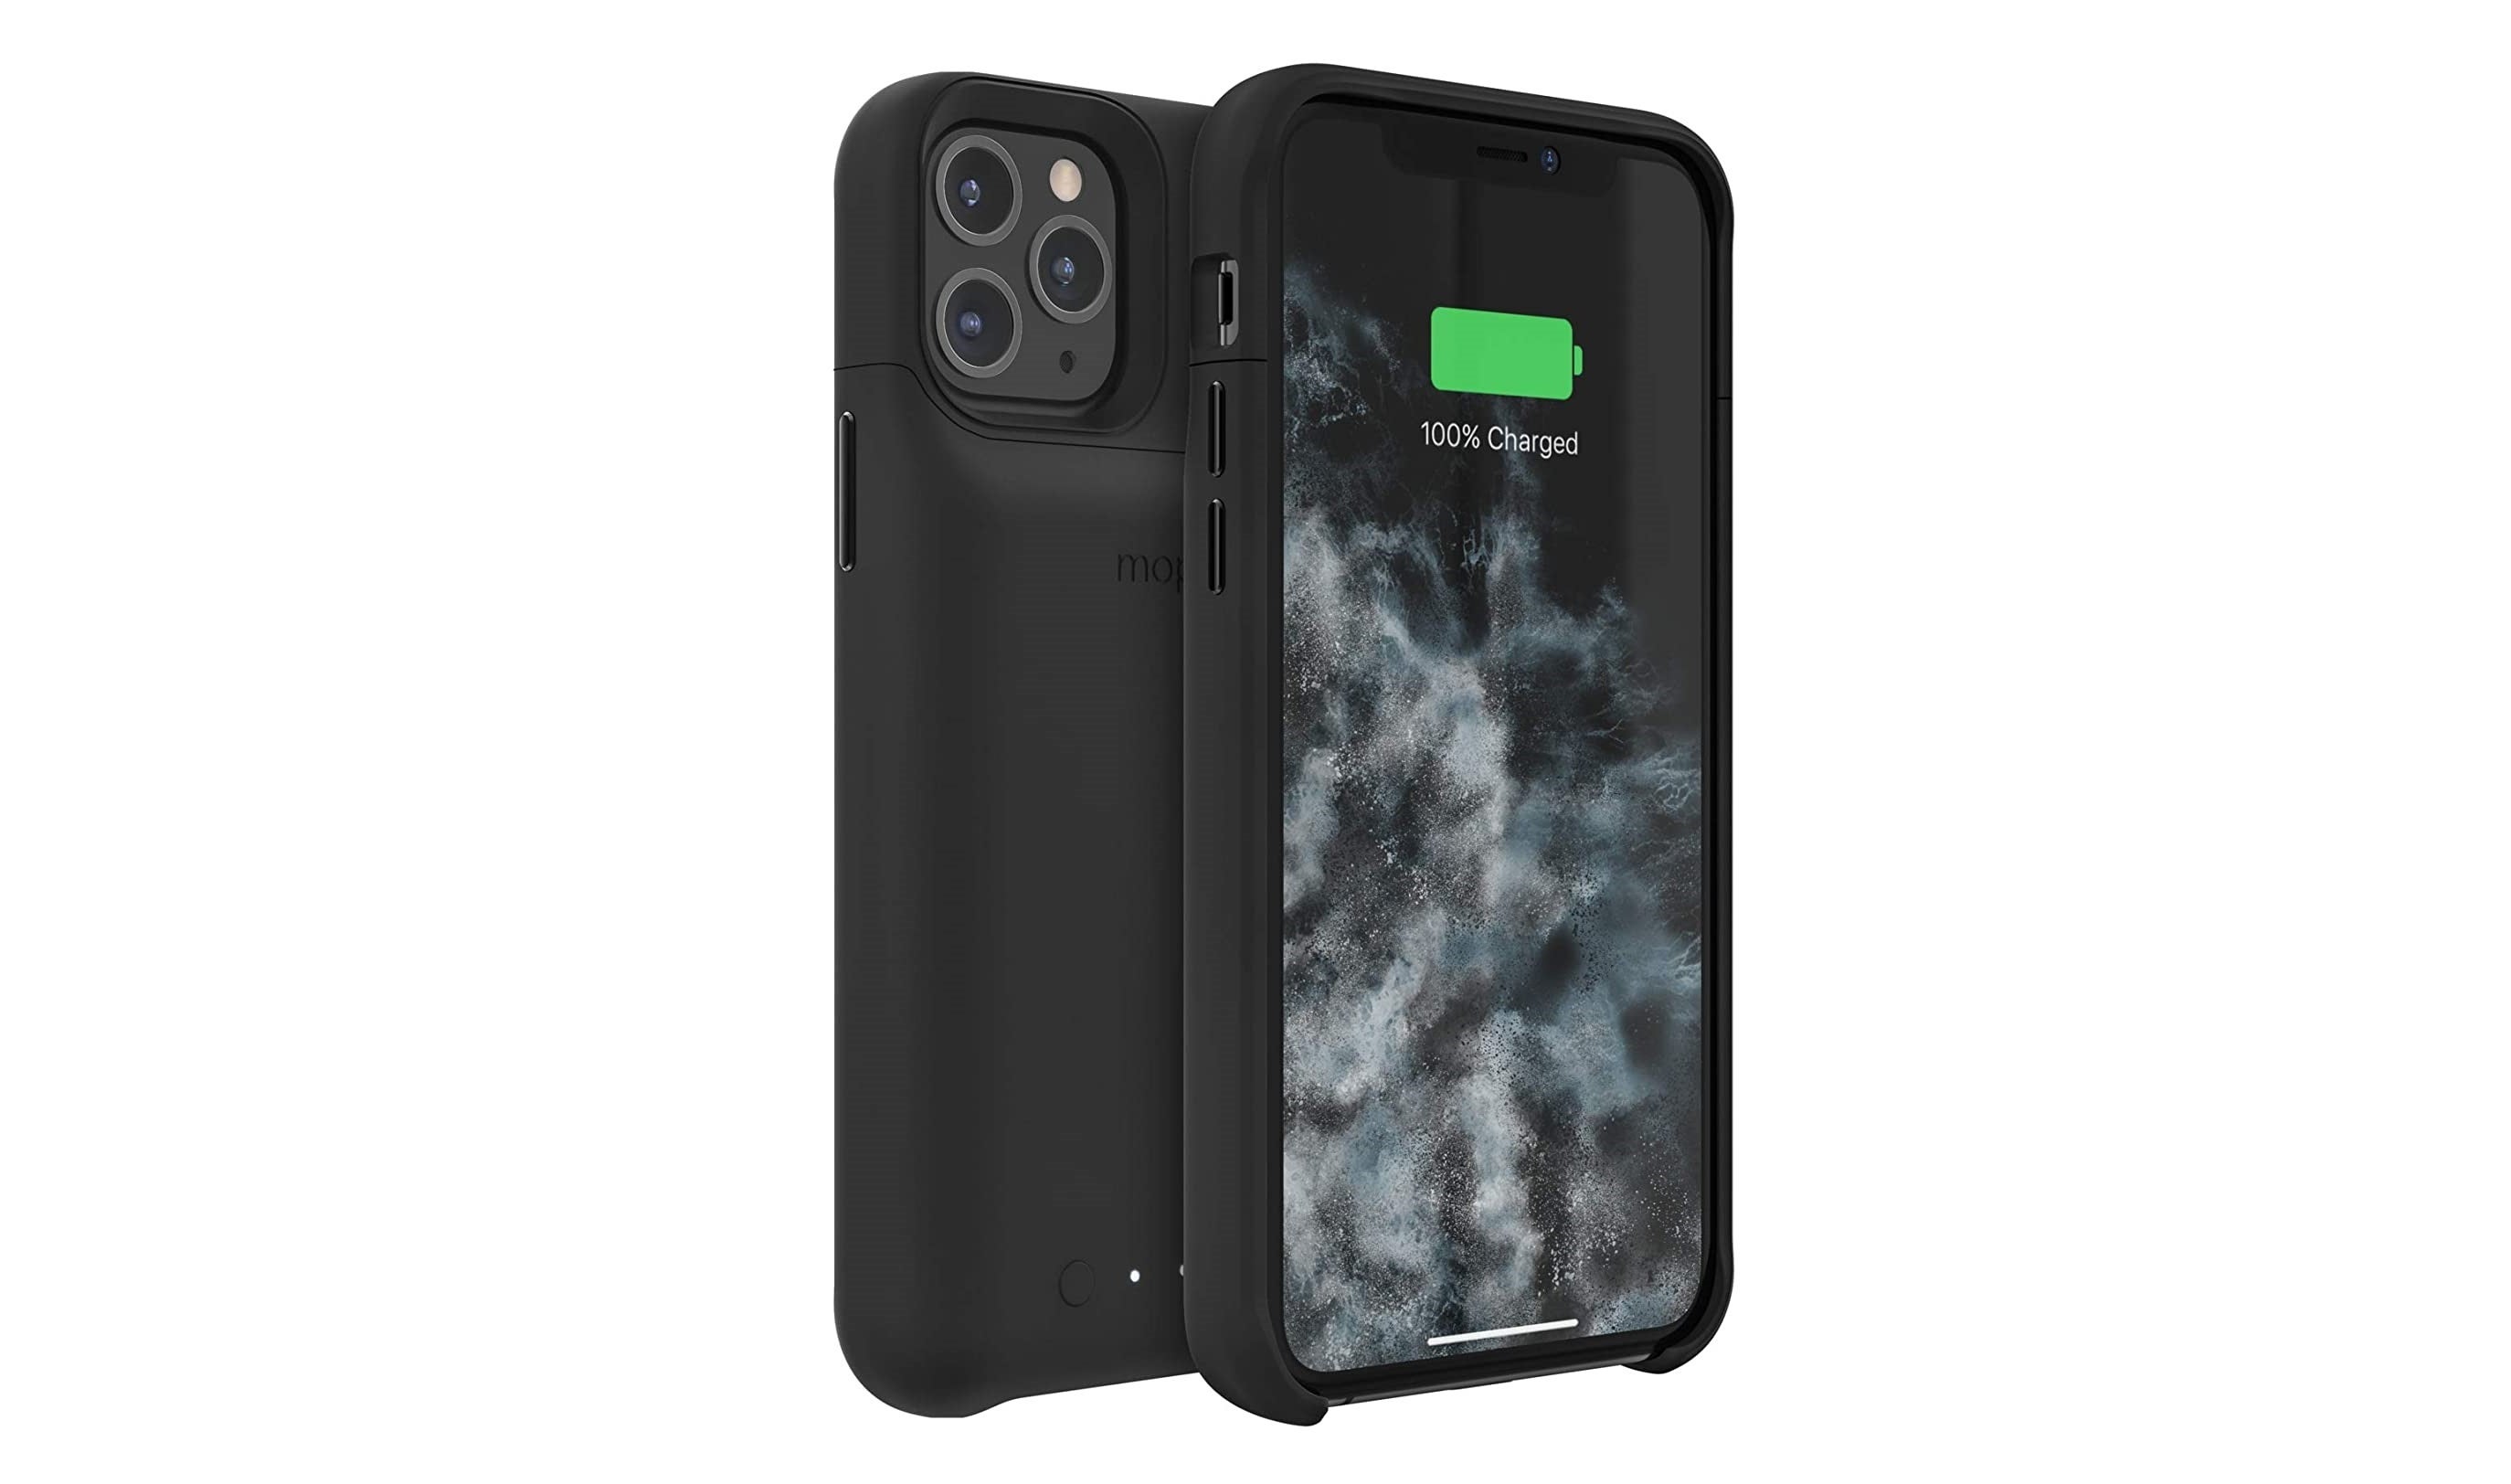 Best iPhone 11, 11 Pro battery cases